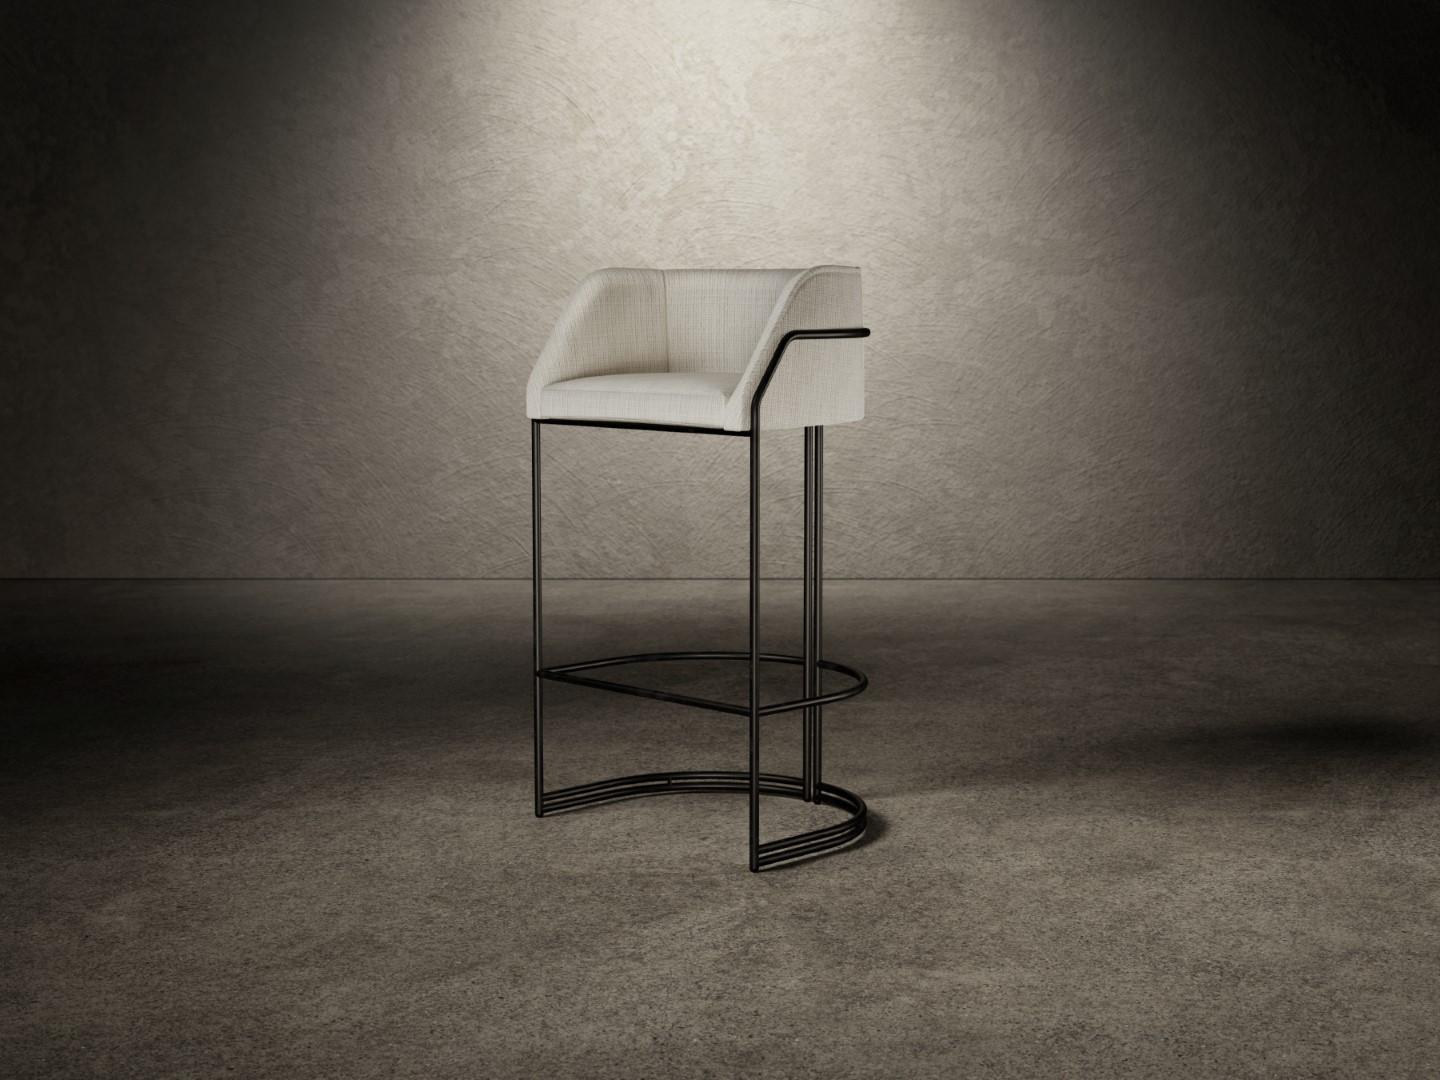 Déjà Vu stool is composed of a wooden shell padded with different densities polyurethane foam and finished with an upper layer of acrylic fiber. 
The Déjà Vu stool is available in two different heights, with the seat completely covered in fabric or